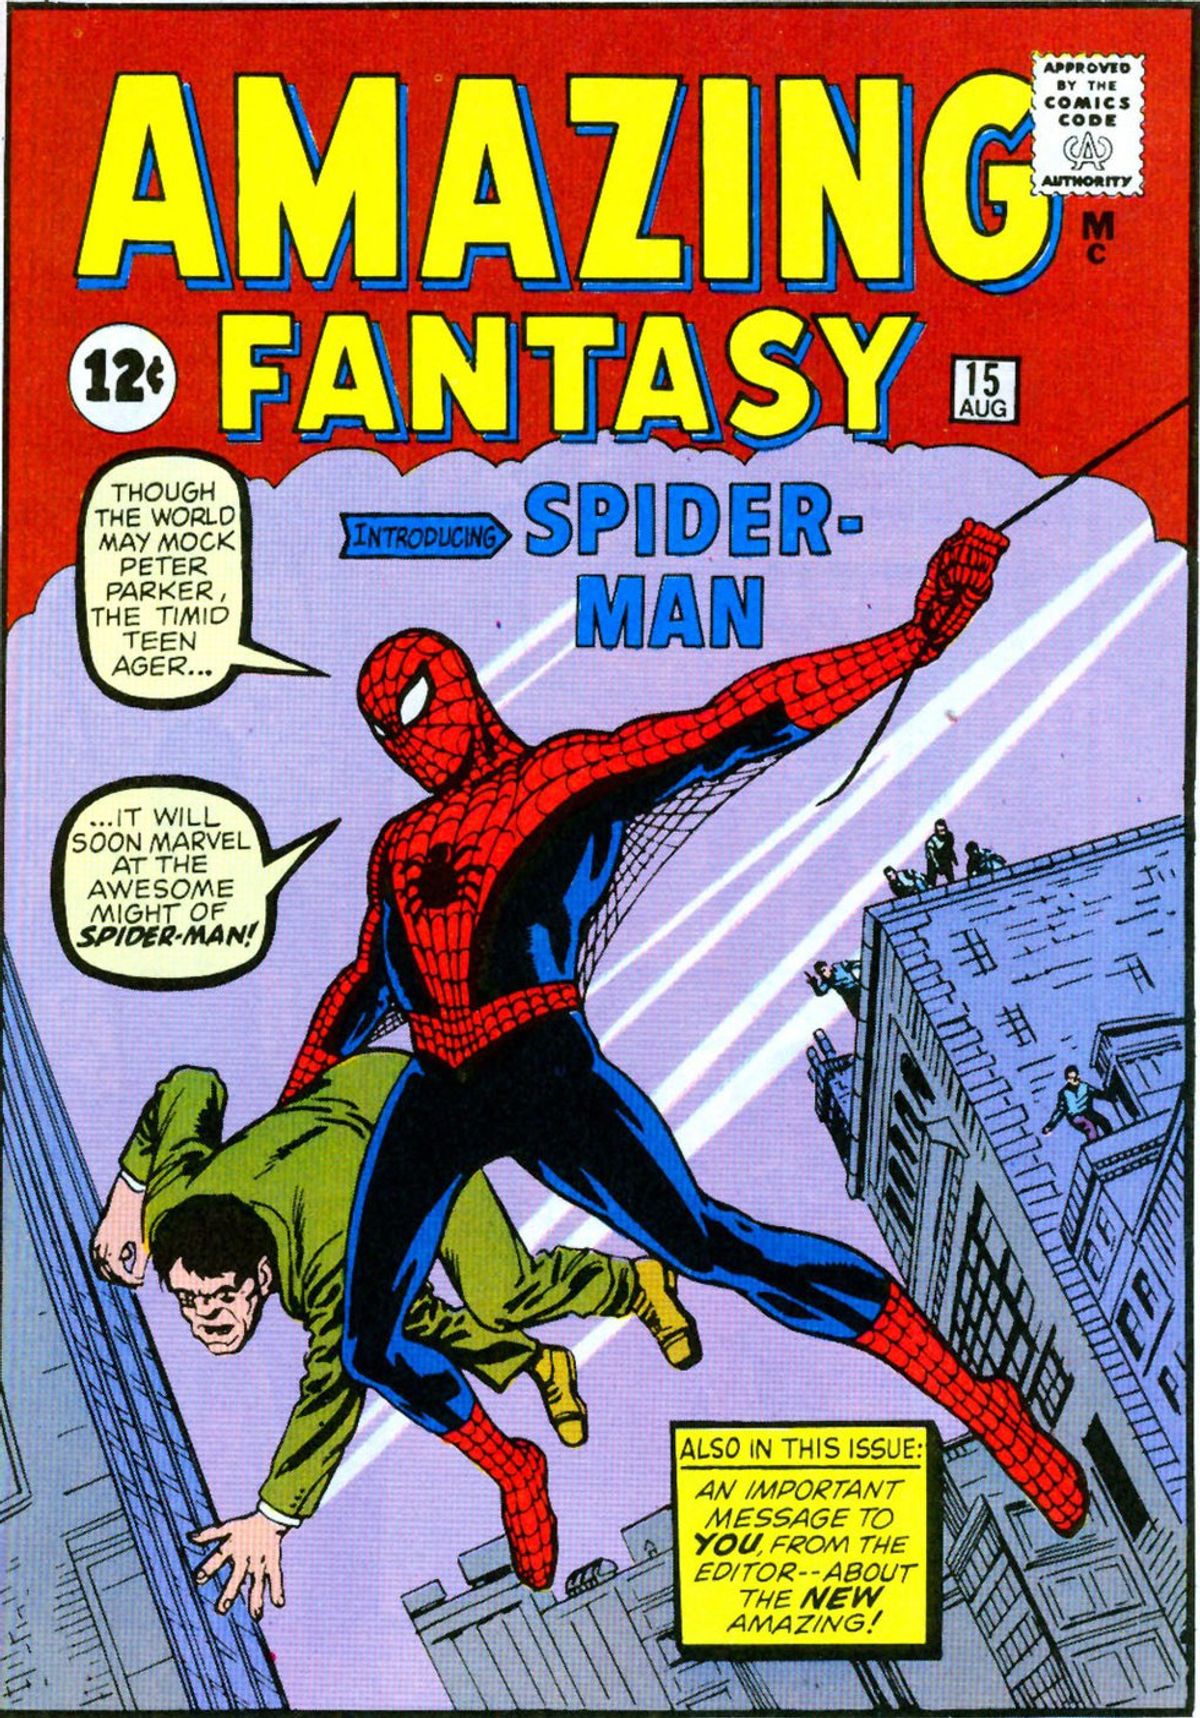 The History of Spider-Man #1